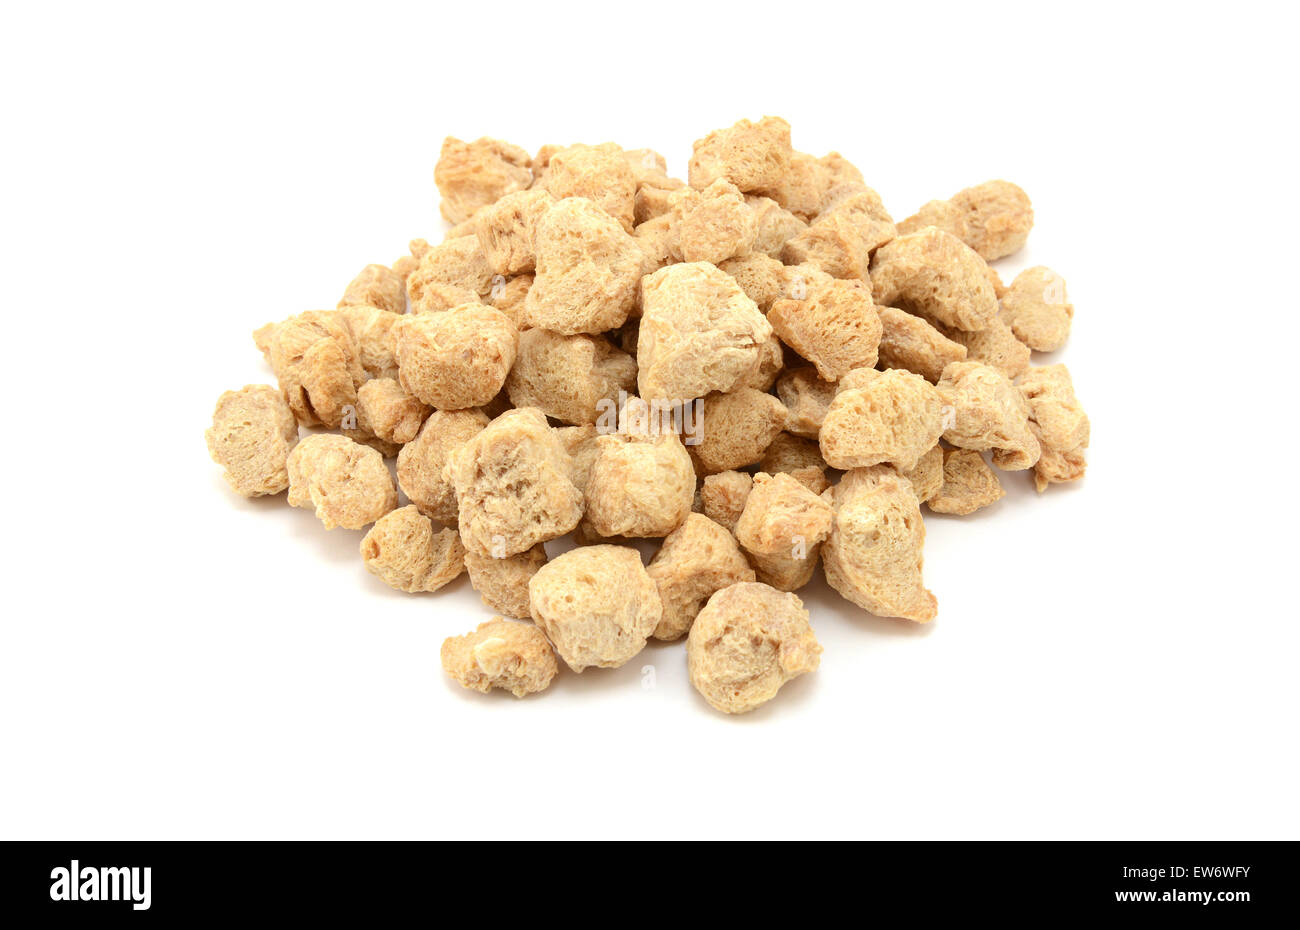 Soya protein chunks used in vegetarian and vegan food, isolated on a white background Stock Photo